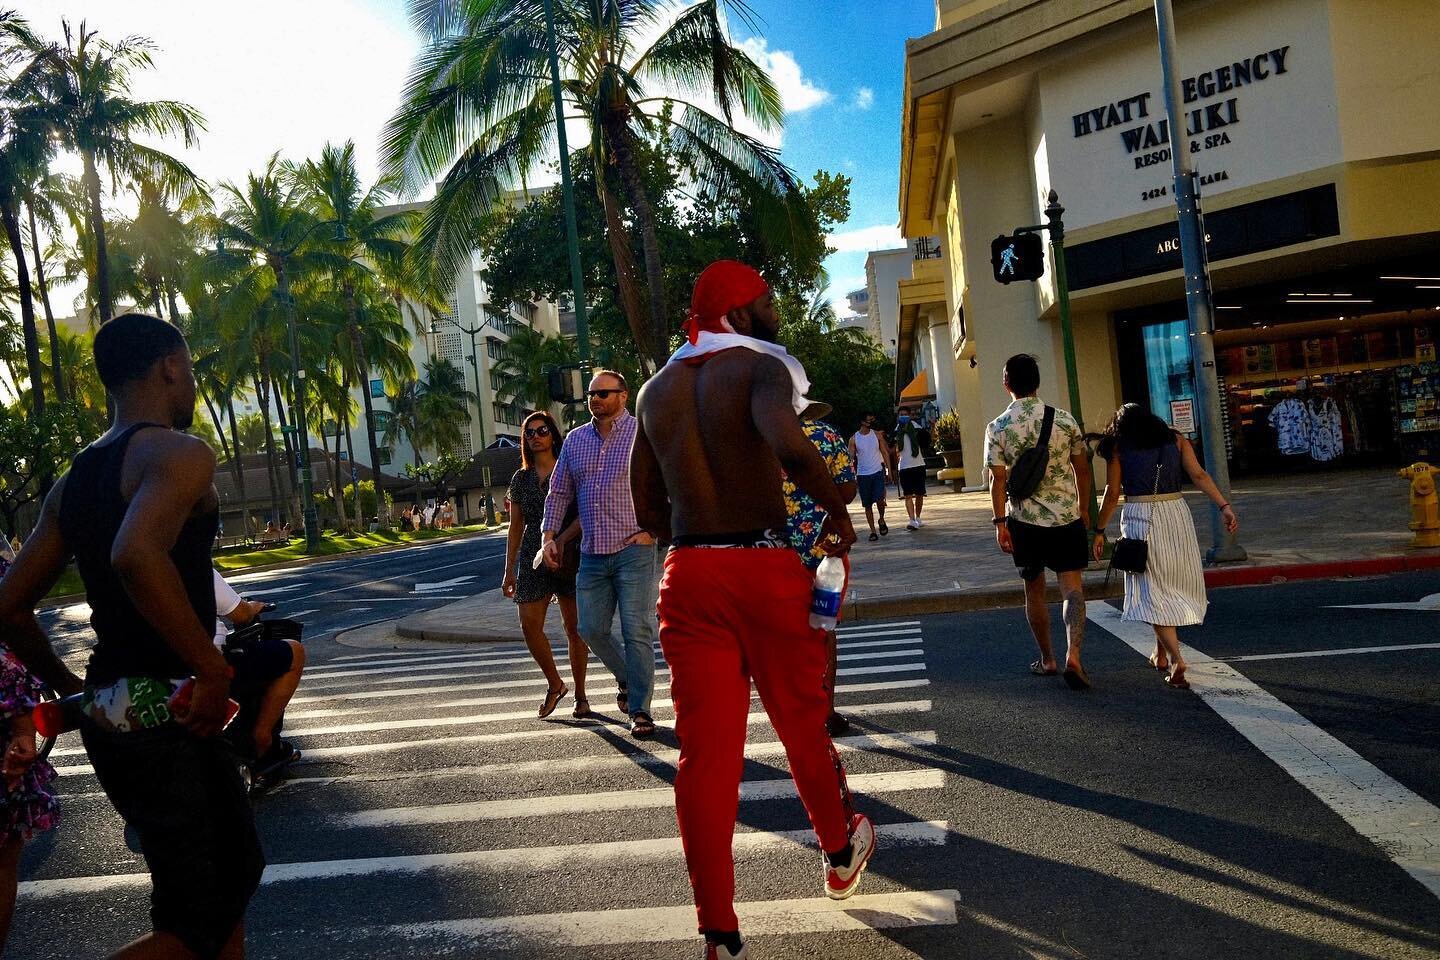 Strolling through the streets when it was just starting to get busy again.
05.21 &middot; Waikiki &middot; Oahu, Hawaii 

#fujifilmx100v #goldcoast #hawaii #beach #oahu #streets  #streetfinder #spicollective #timeless_streets #waikiki